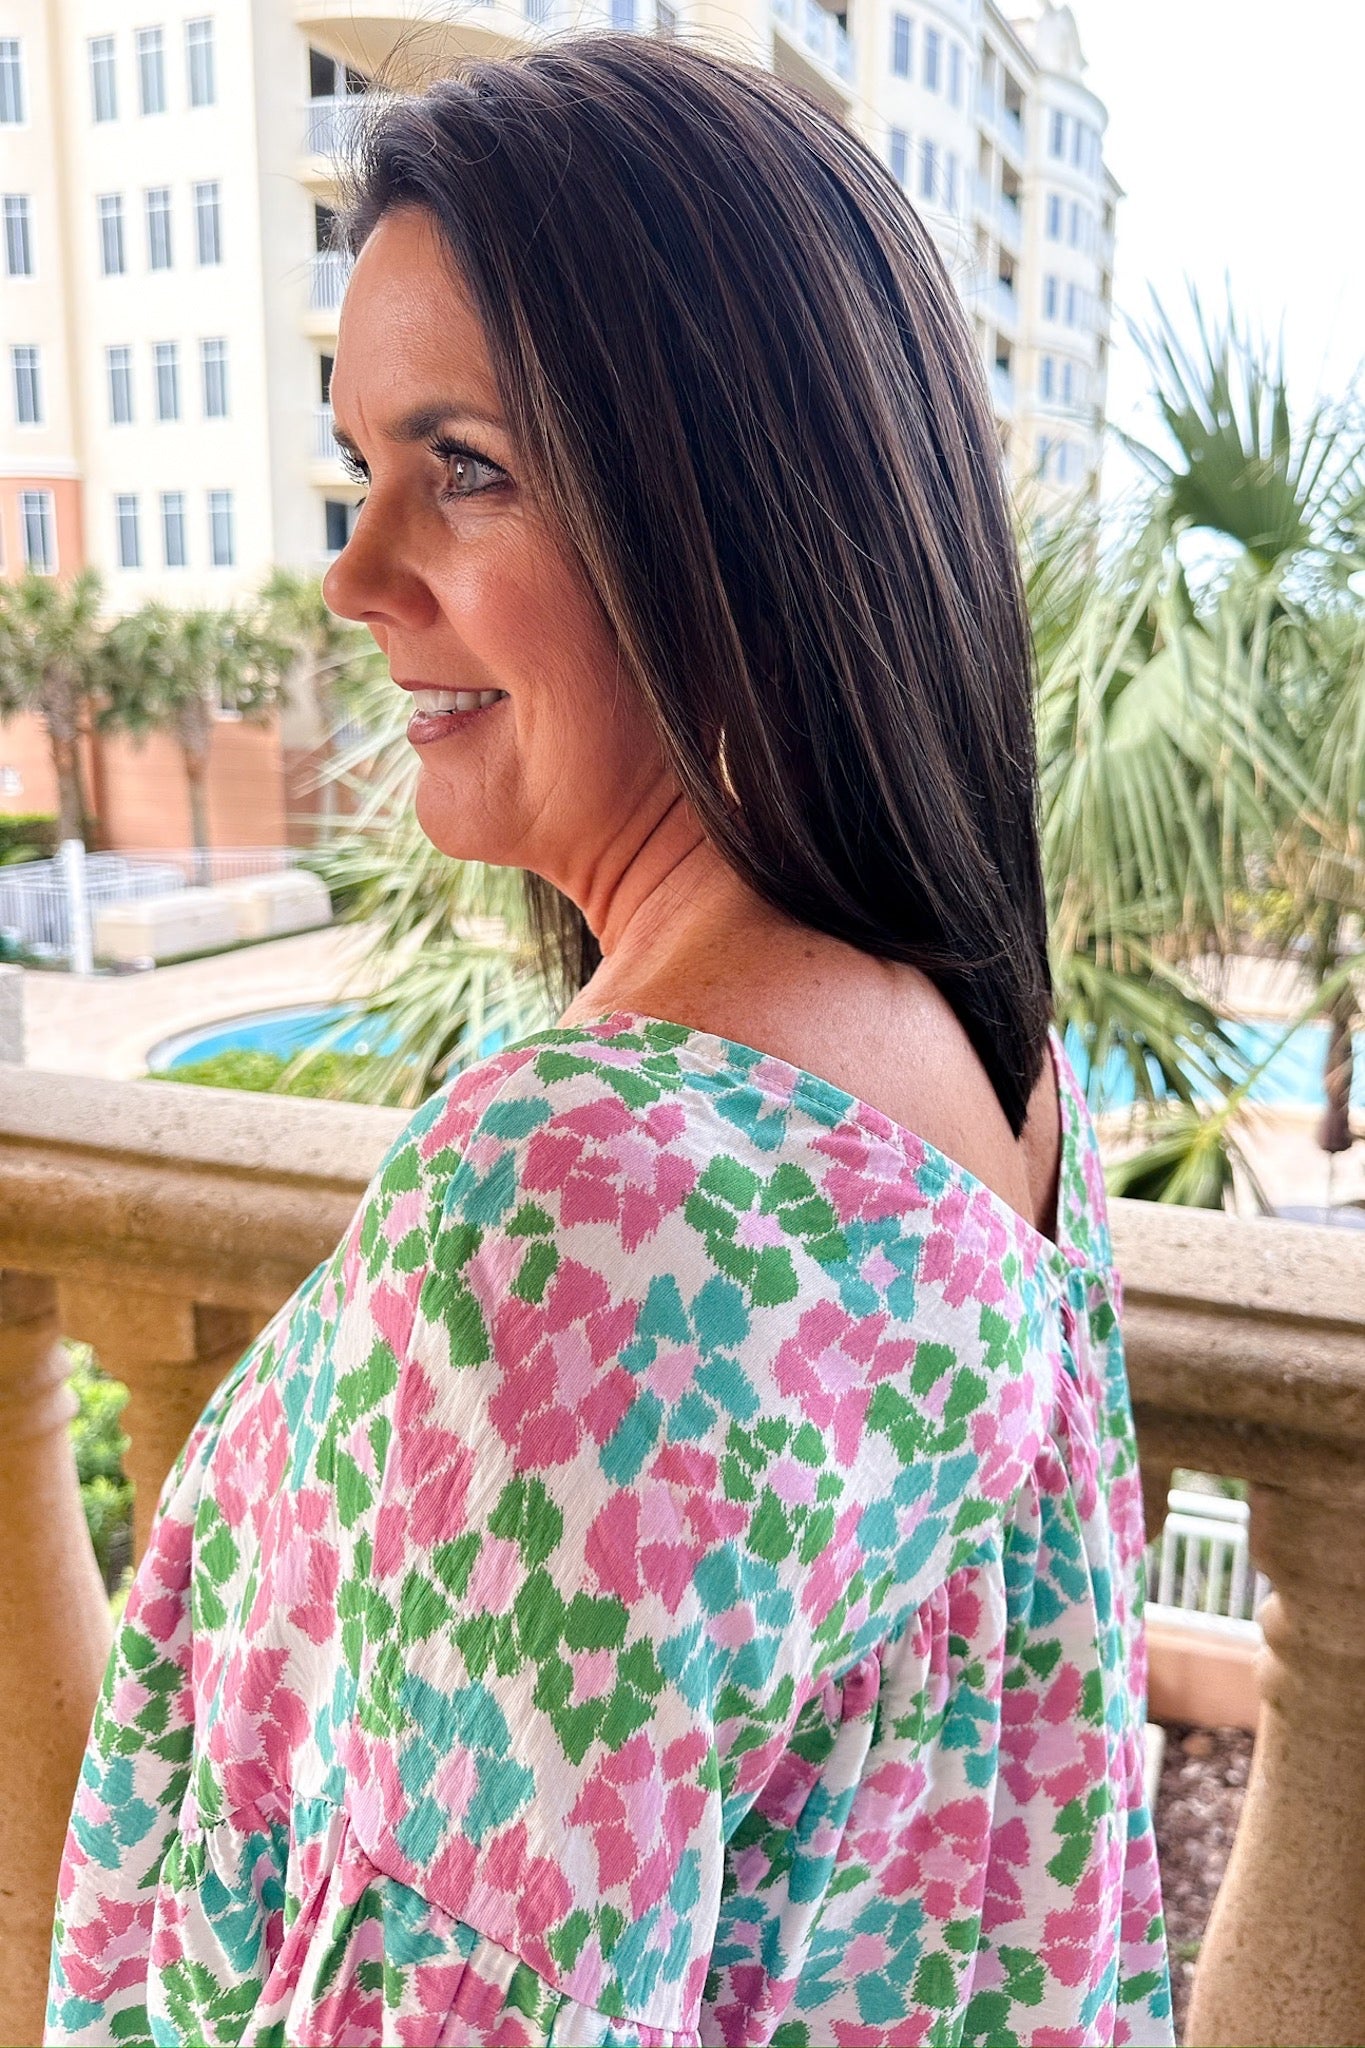 The Loren Top in Mosaic Moment by Michelle McDowell